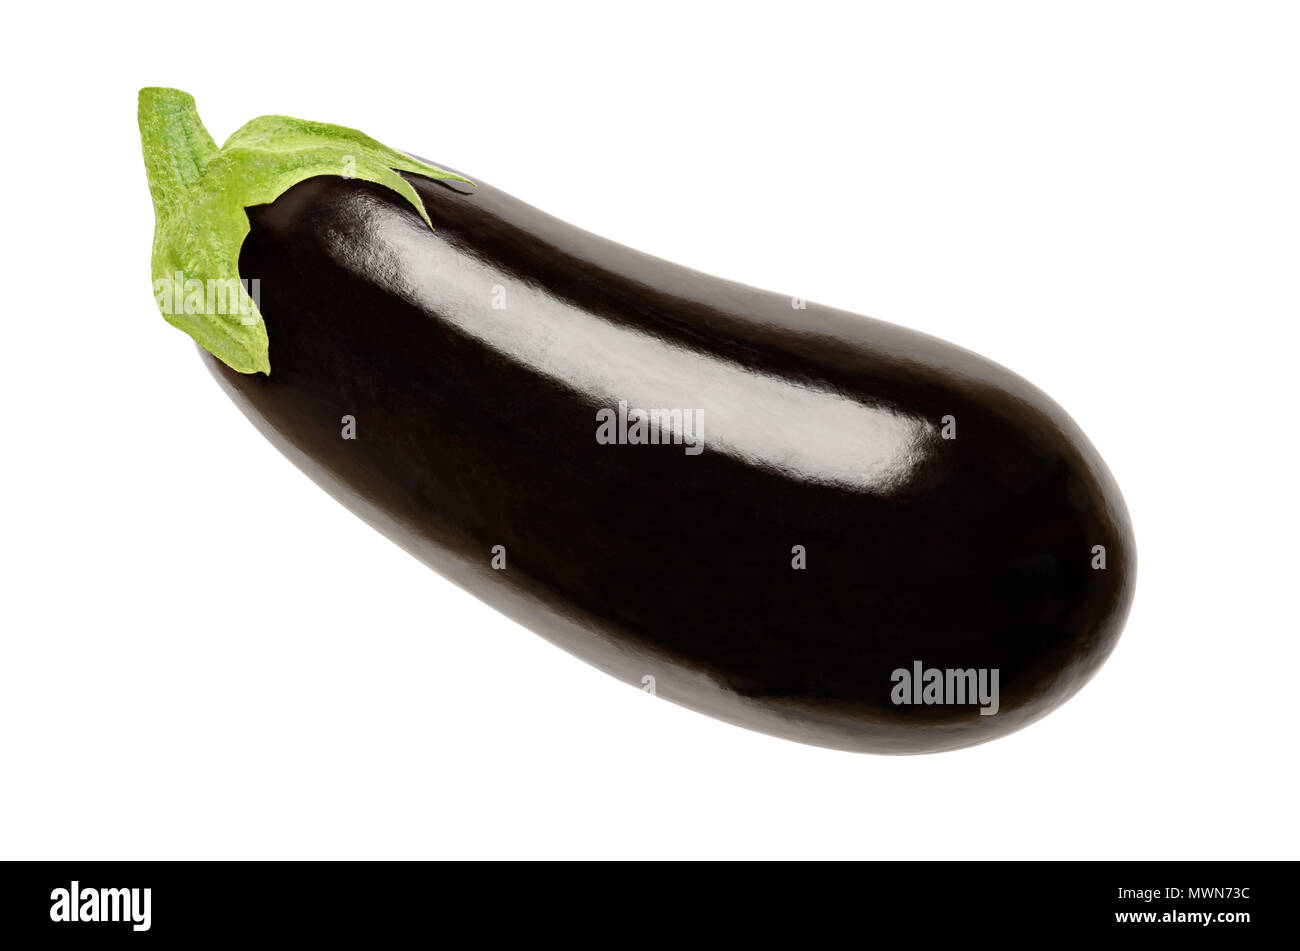 Eggplant from above. Solanum melongena, also aubergine or brinjal. Nightshade. Elongated oval shaped, black skinned fruit, used for cooking. Photo. Stock Photo